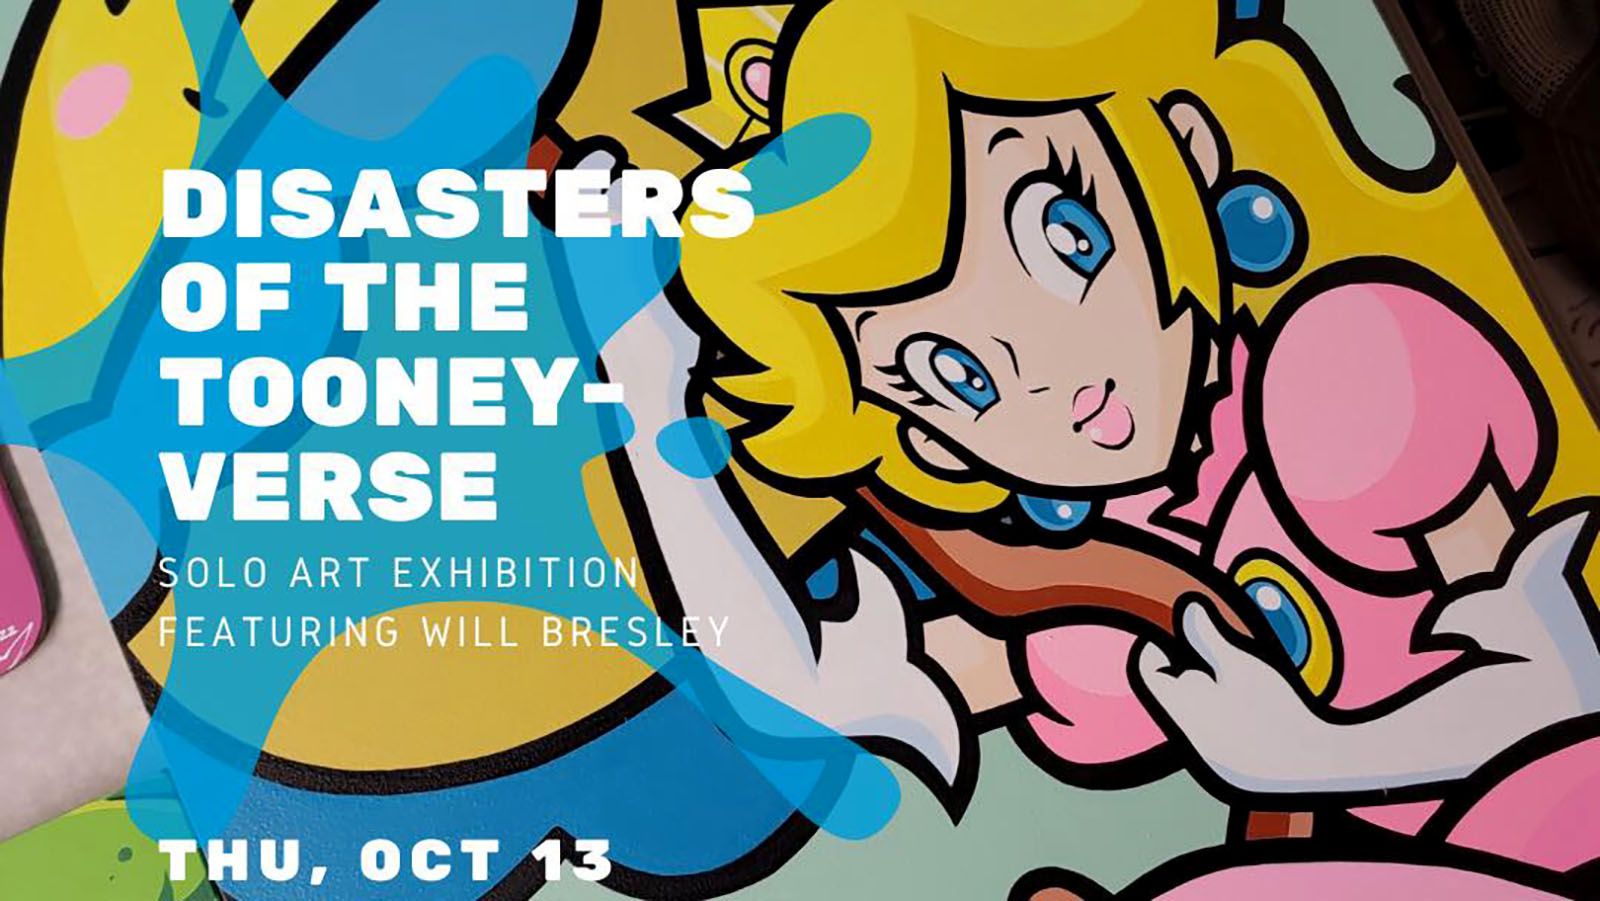 "Disasters of the Tooney-verse" will be at The Garden on Oct. 13.